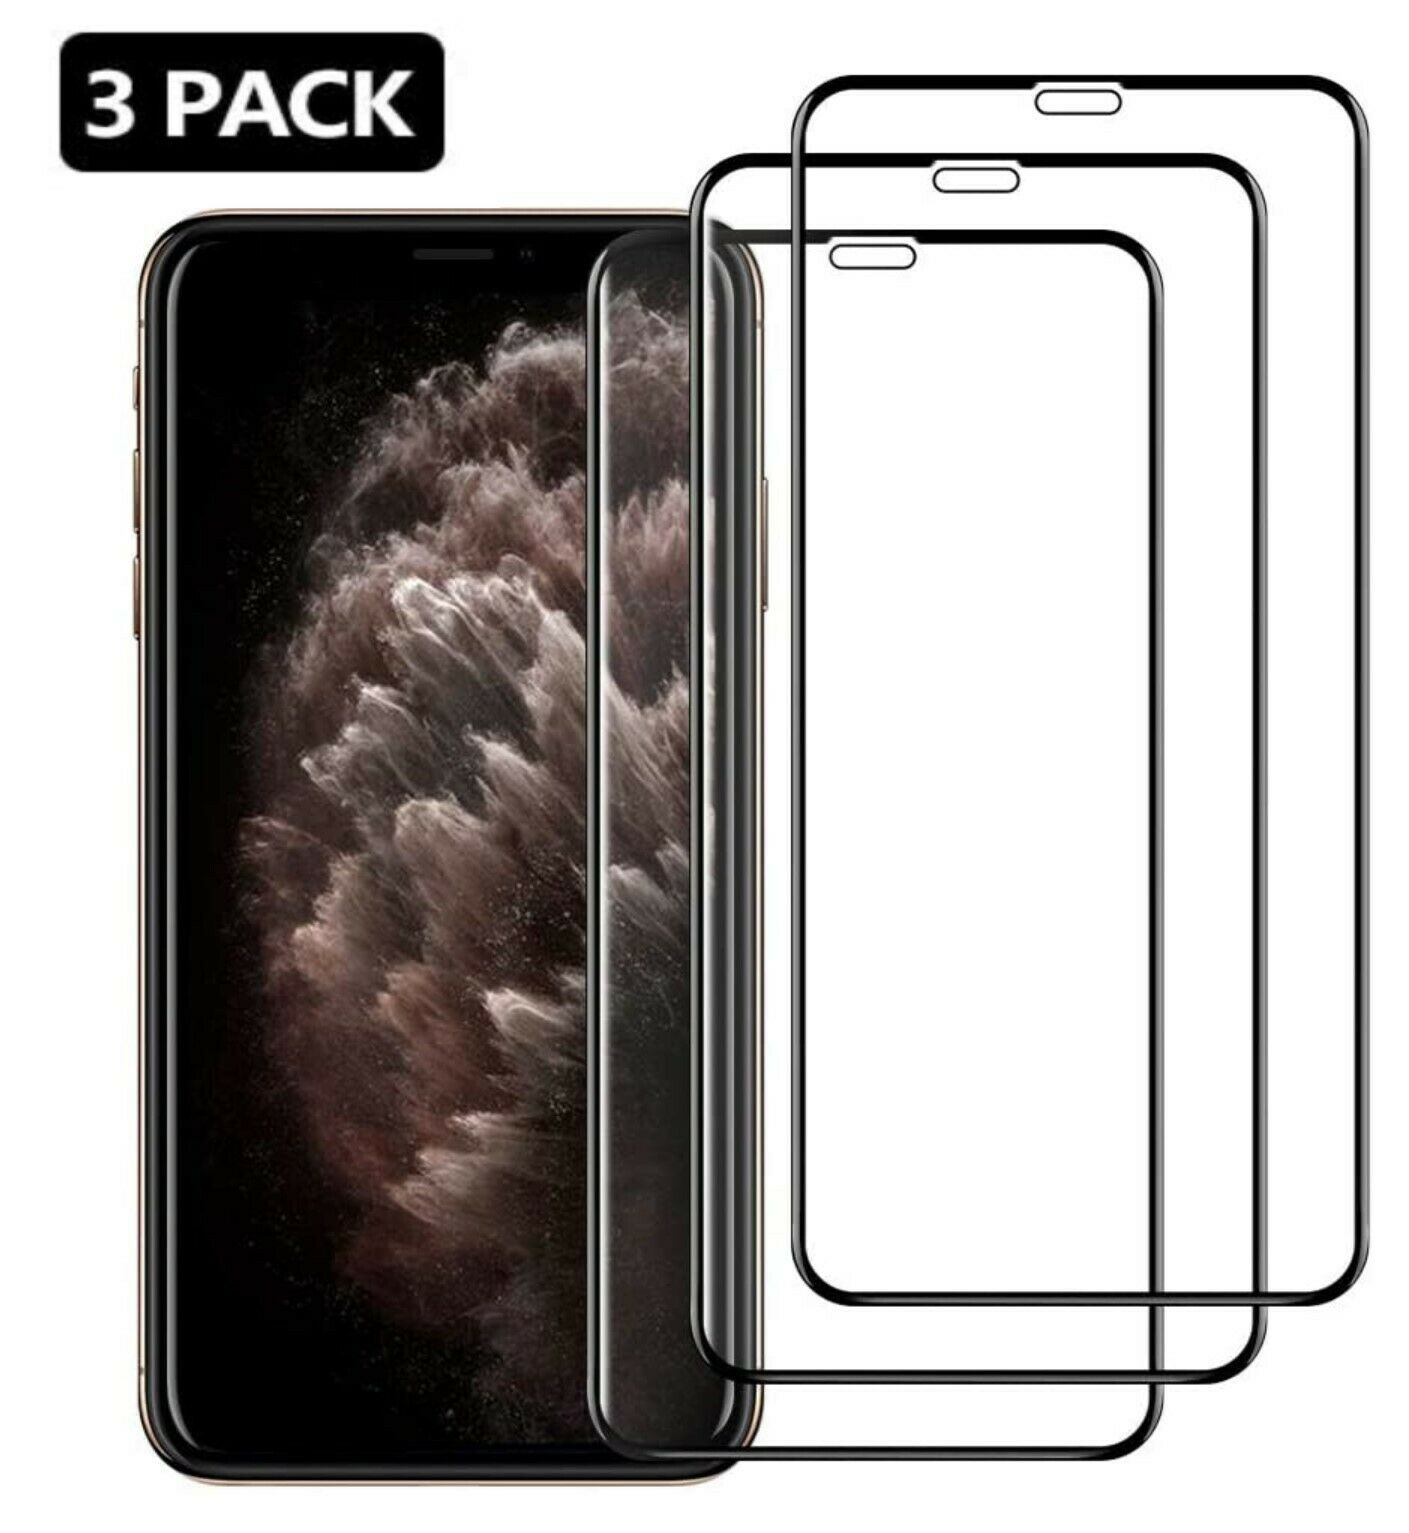 3-pack Full Coverage Tempered Glass Screen Protector For Iphone Xs 11 12 Pro/max